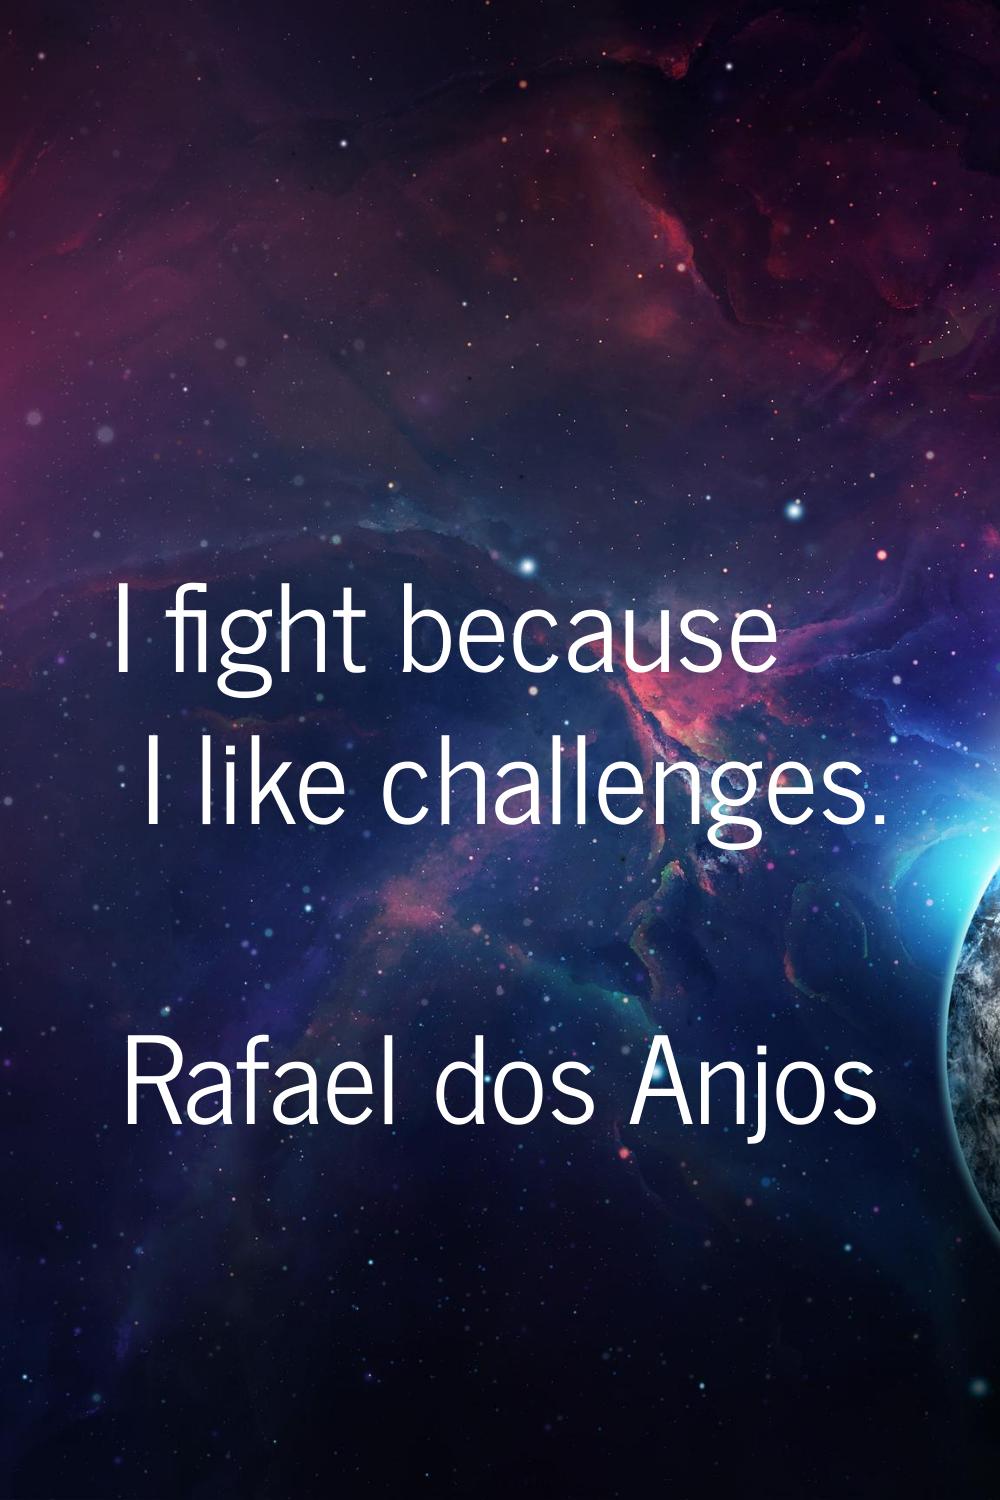 I fight because I like challenges.